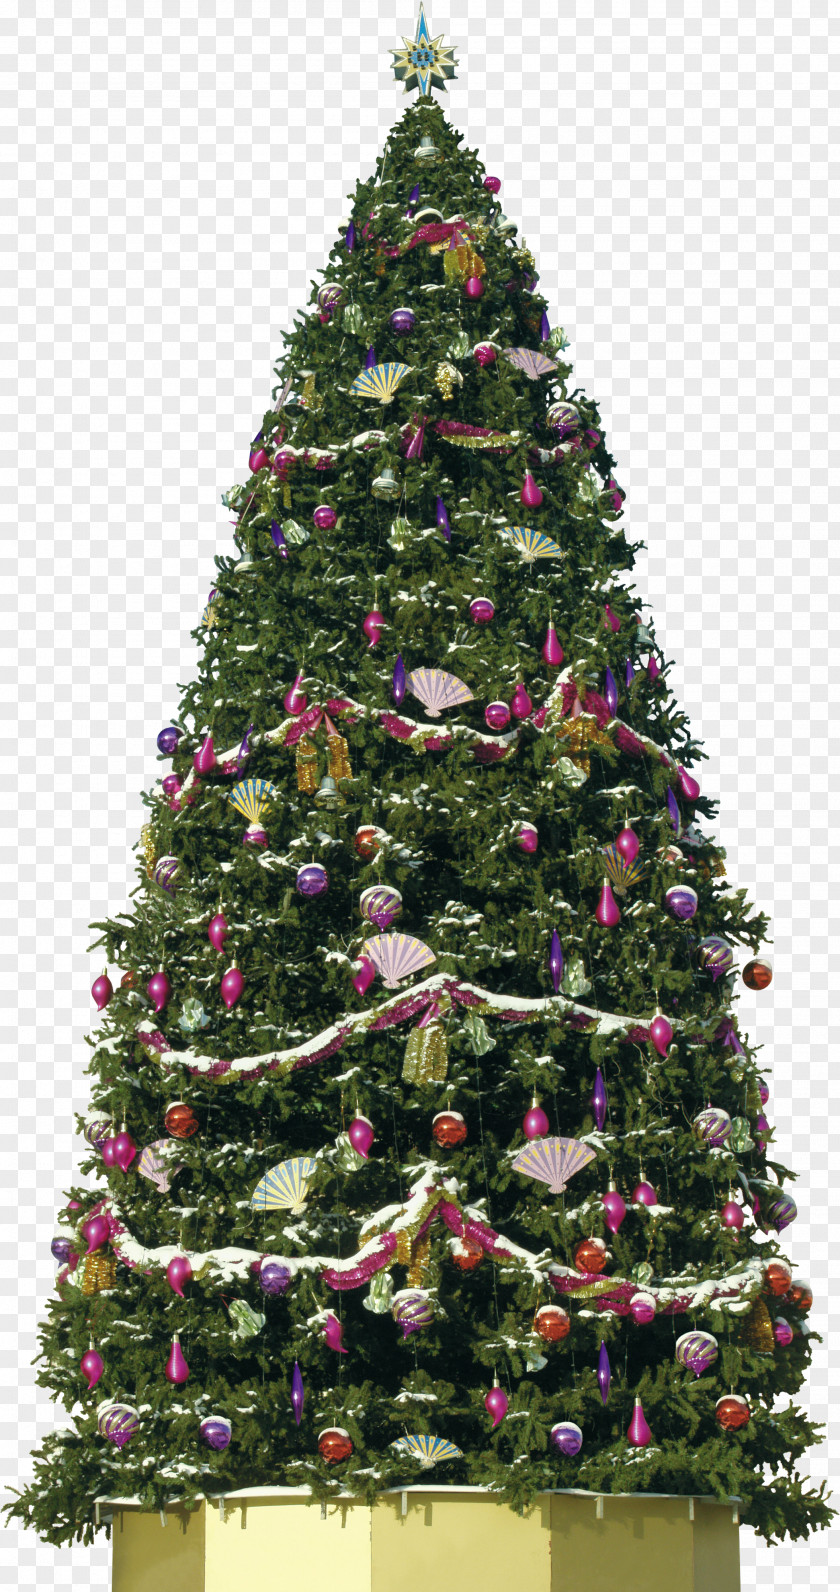 All Christmas Tree New Year Ornament PNG